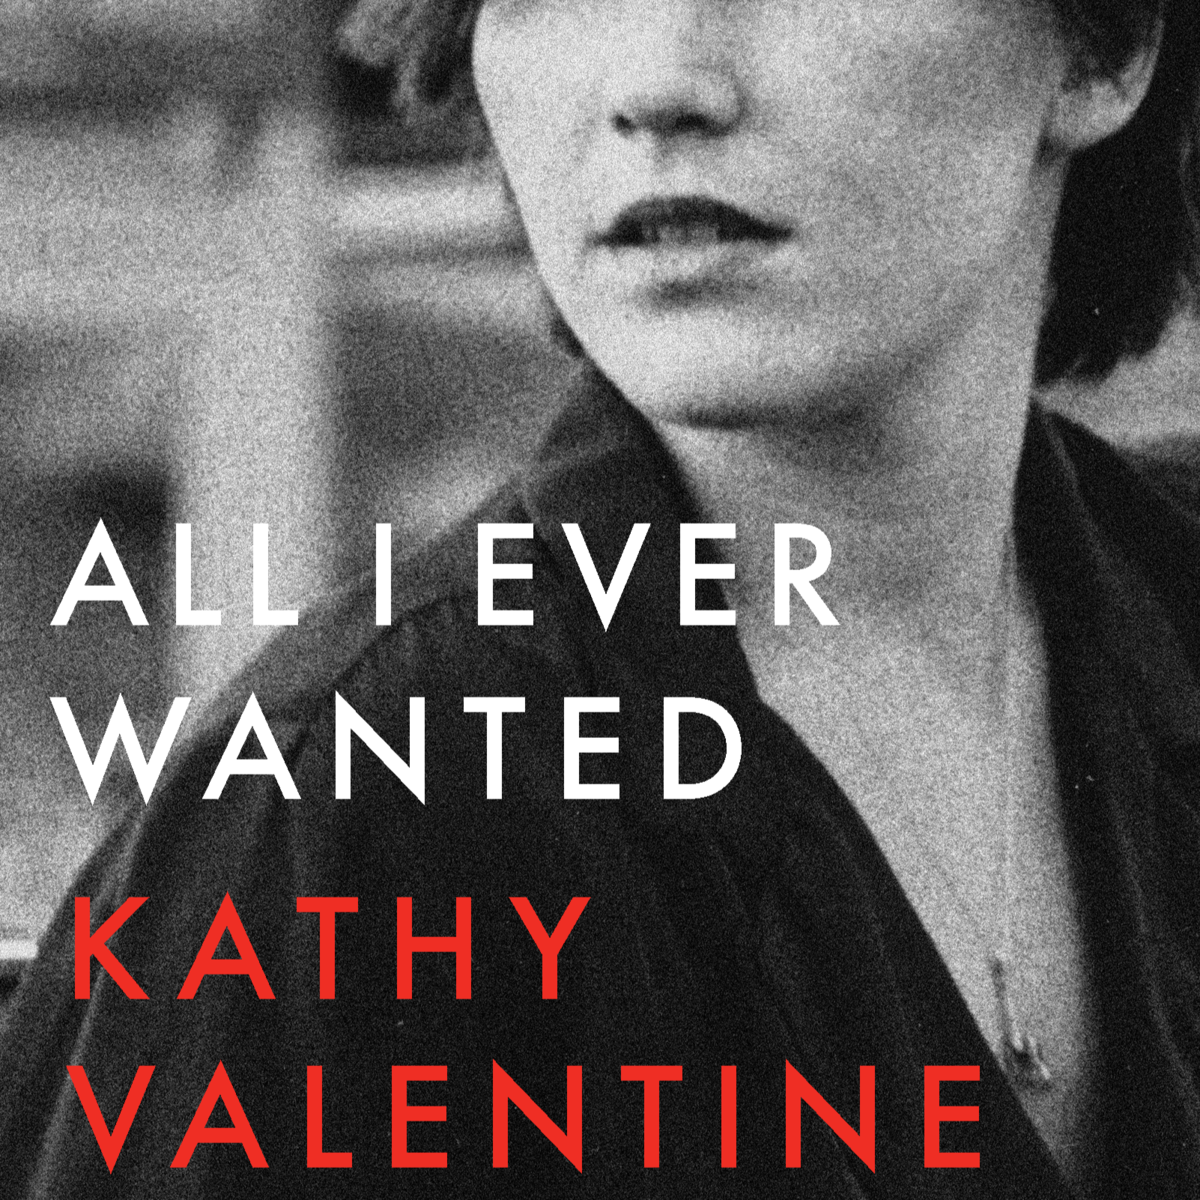 Kathy Valentine "All I Ever Wanted" Book (2020)